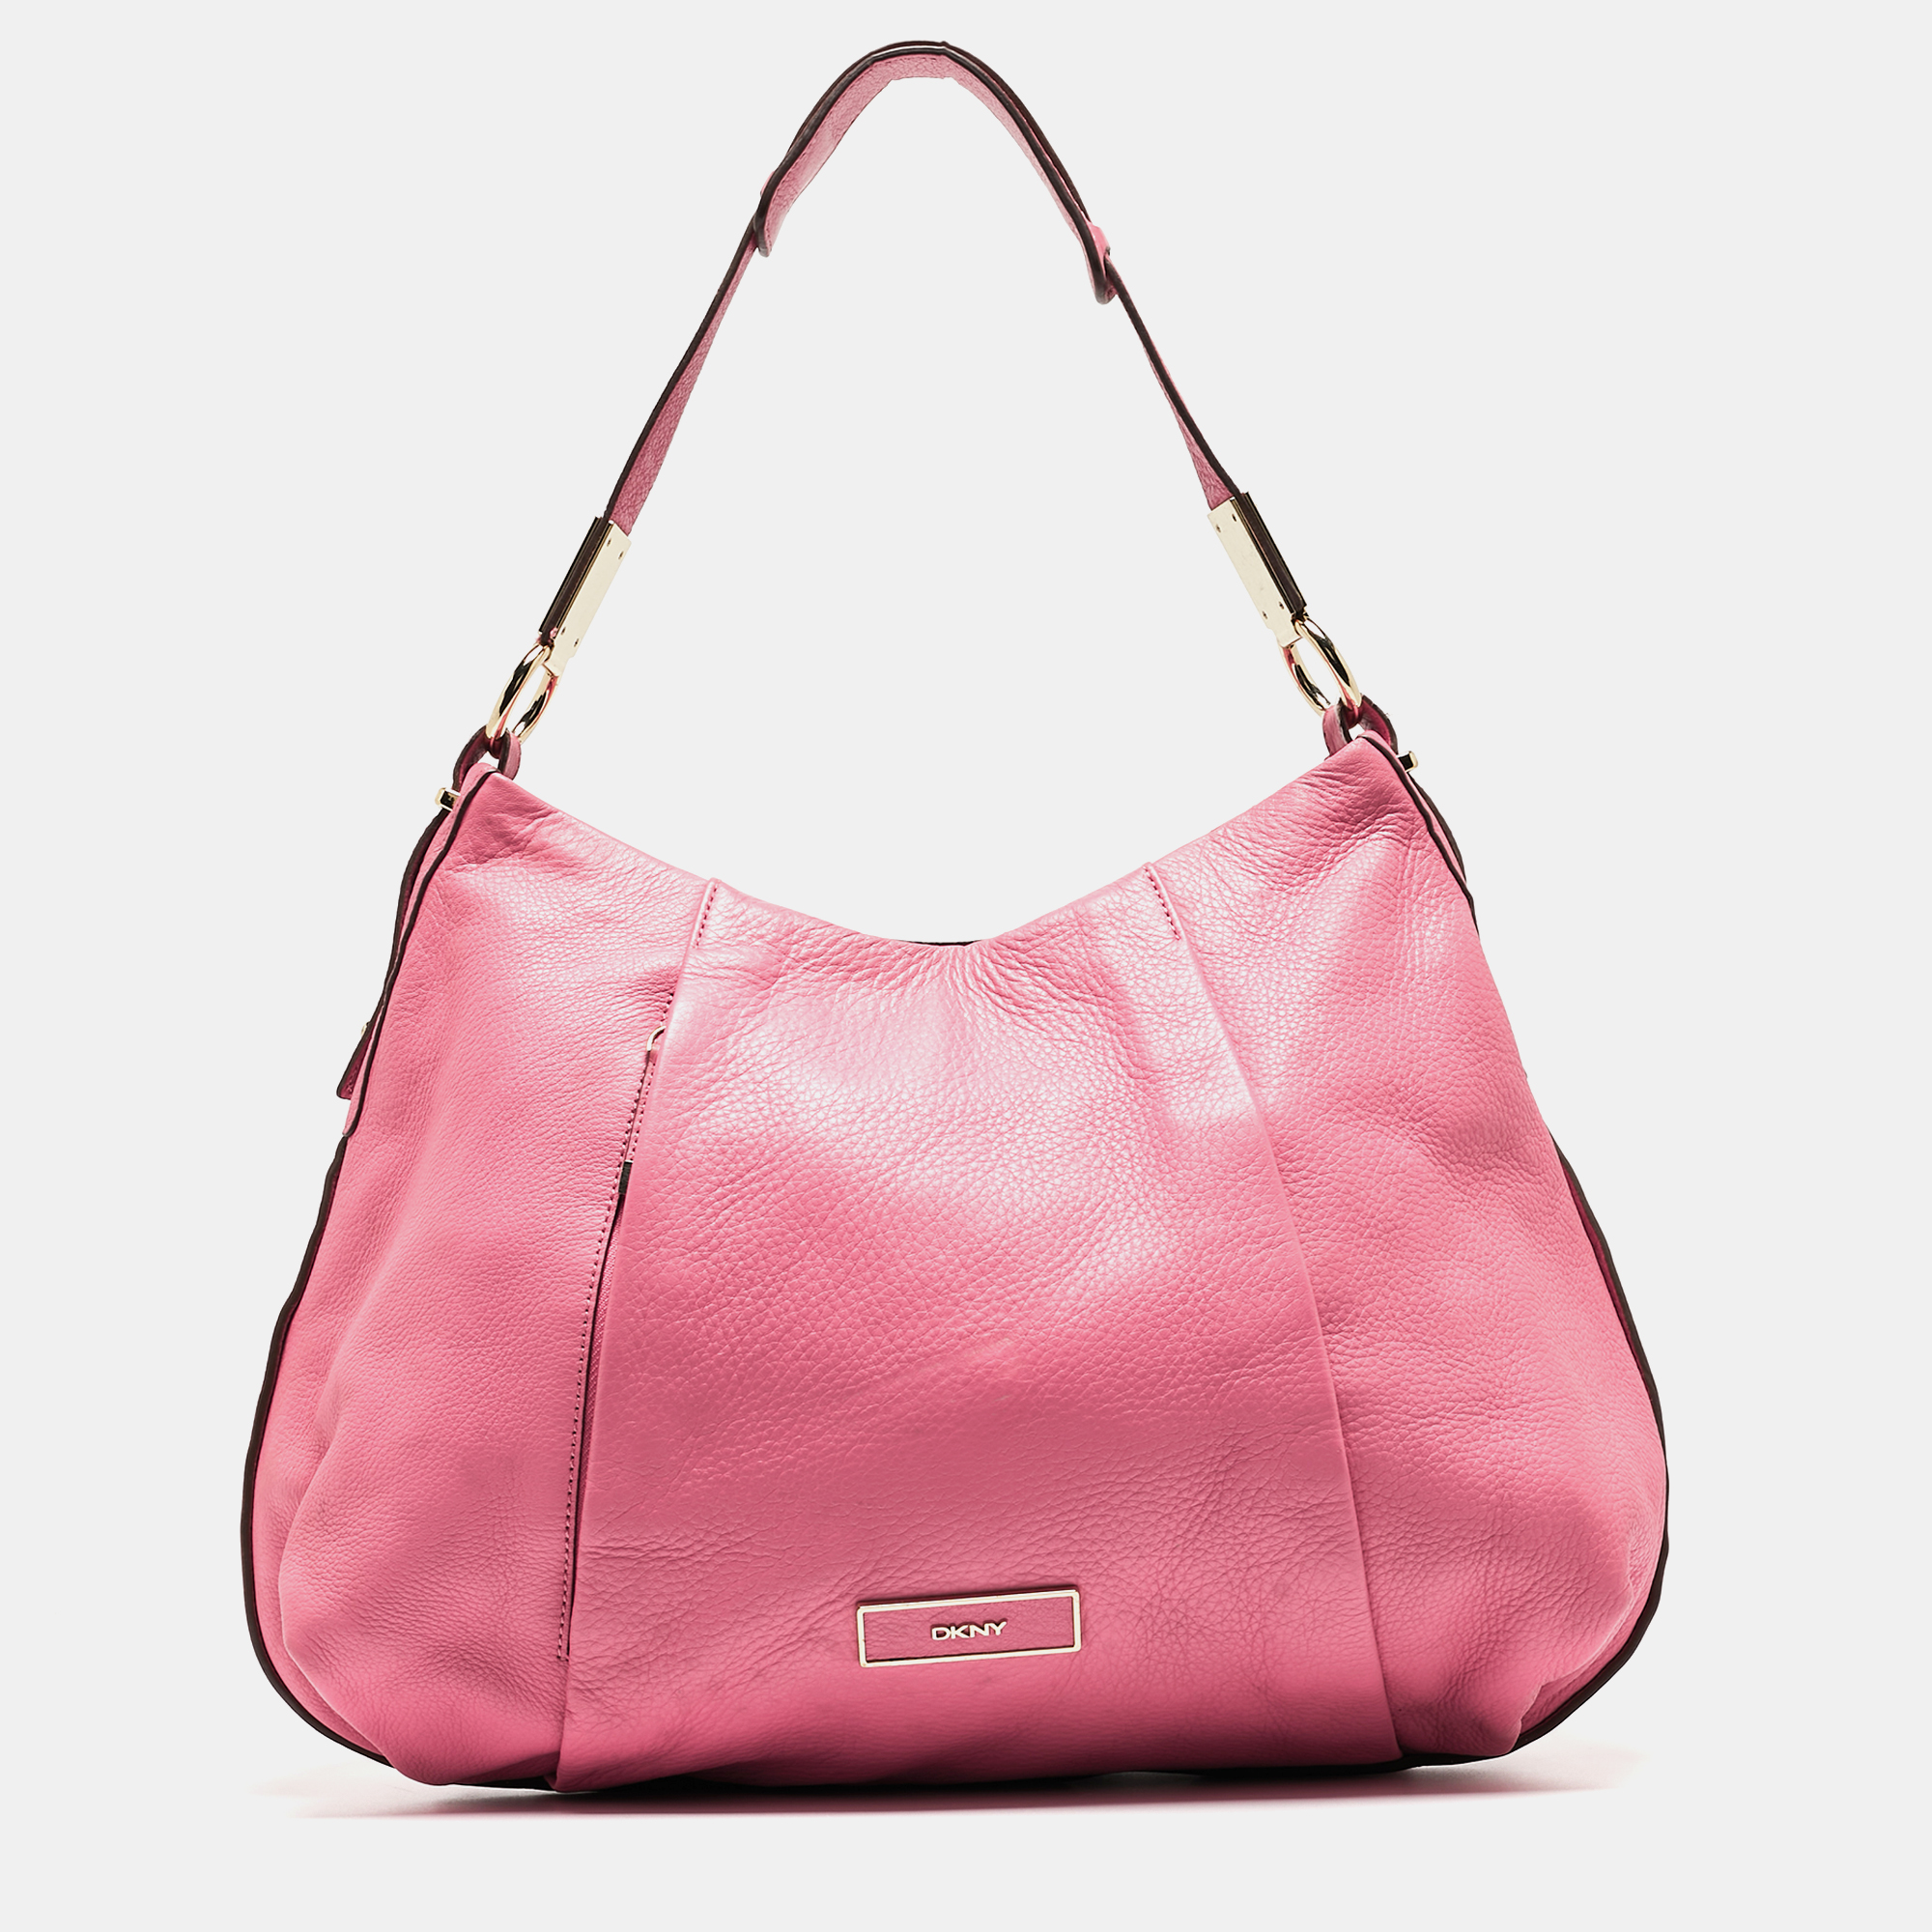 Dkny pink leather pleated hobo